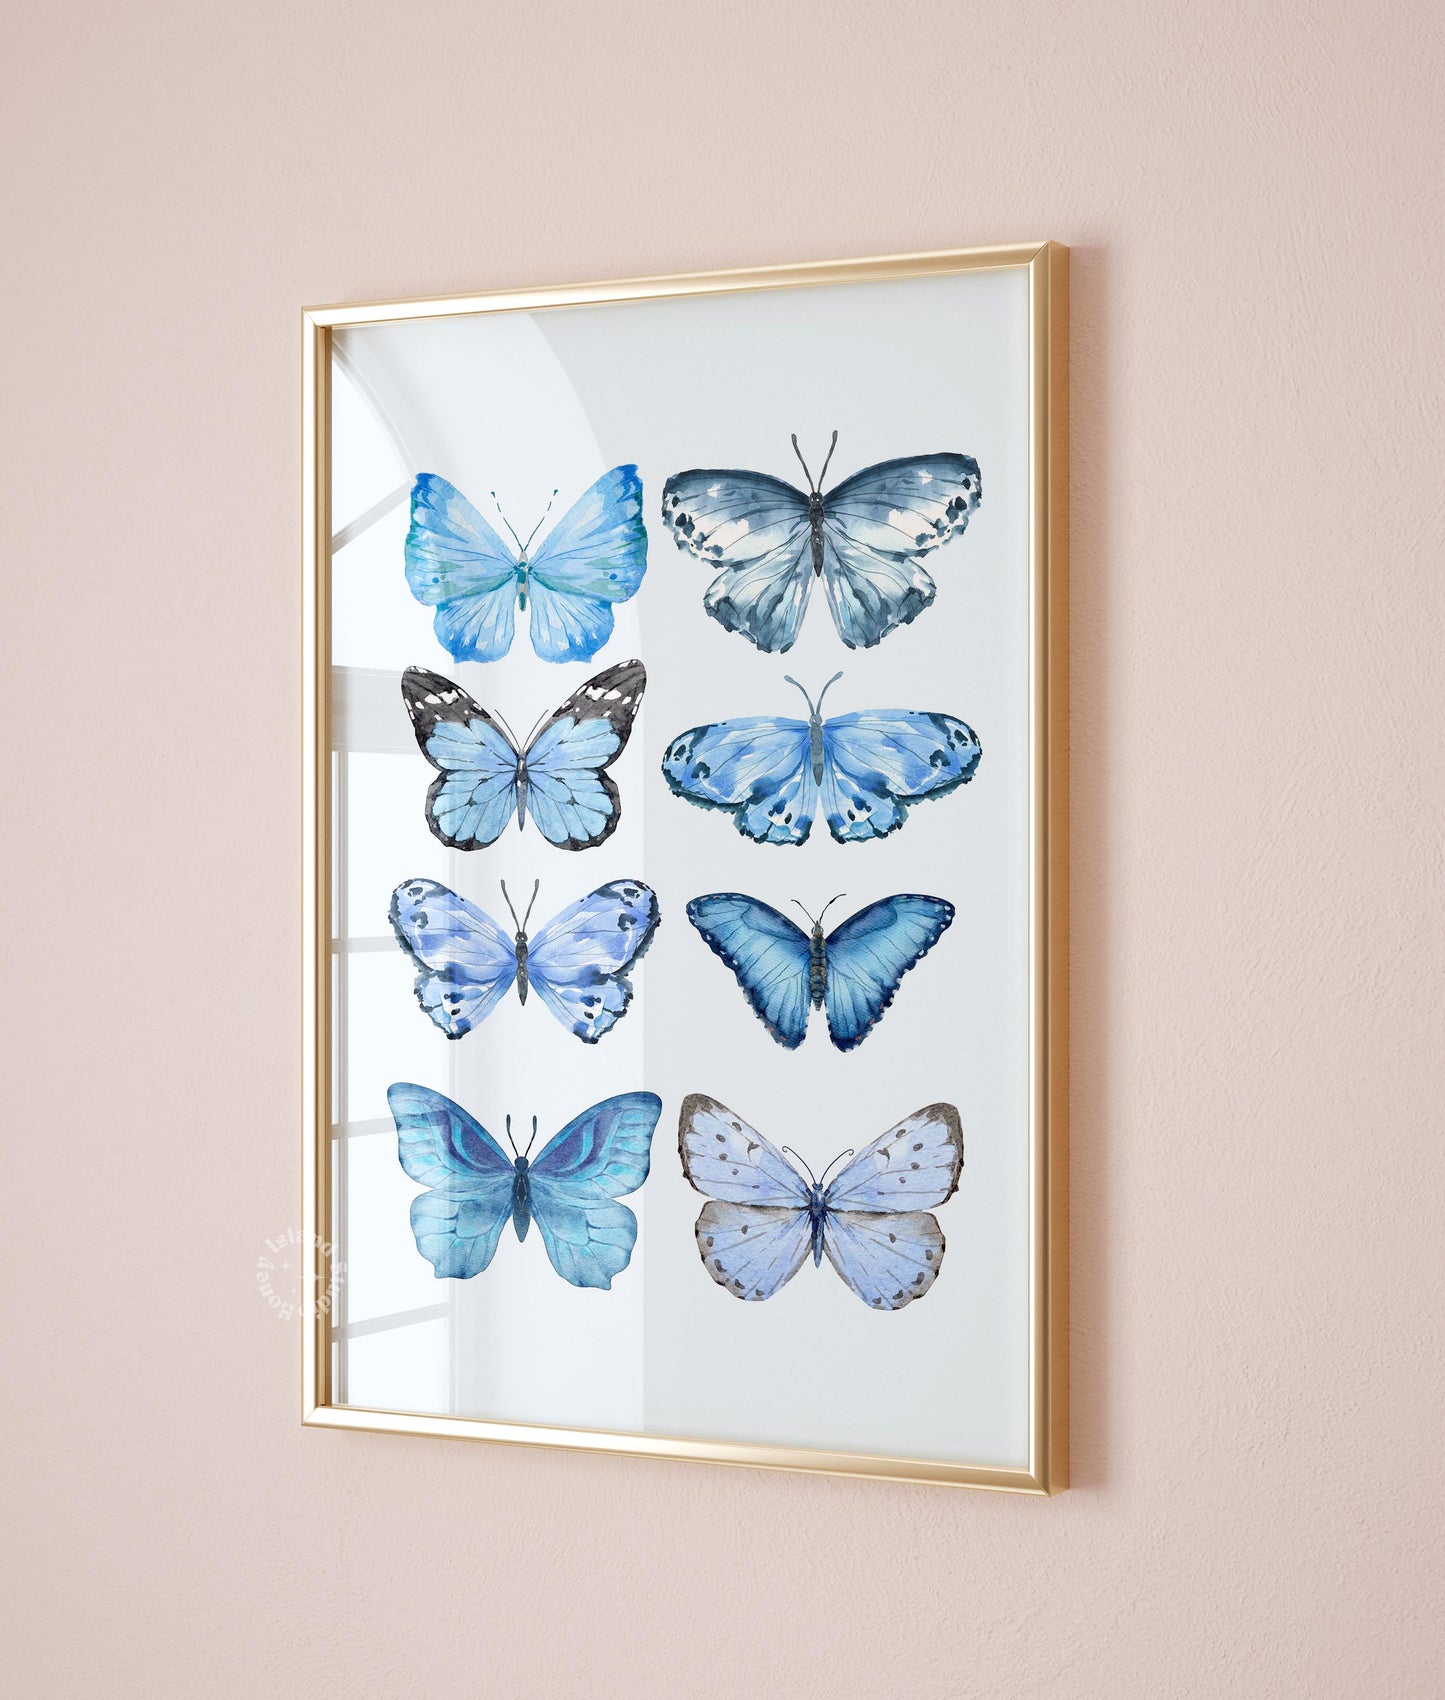 Butterfly collection print - Blue